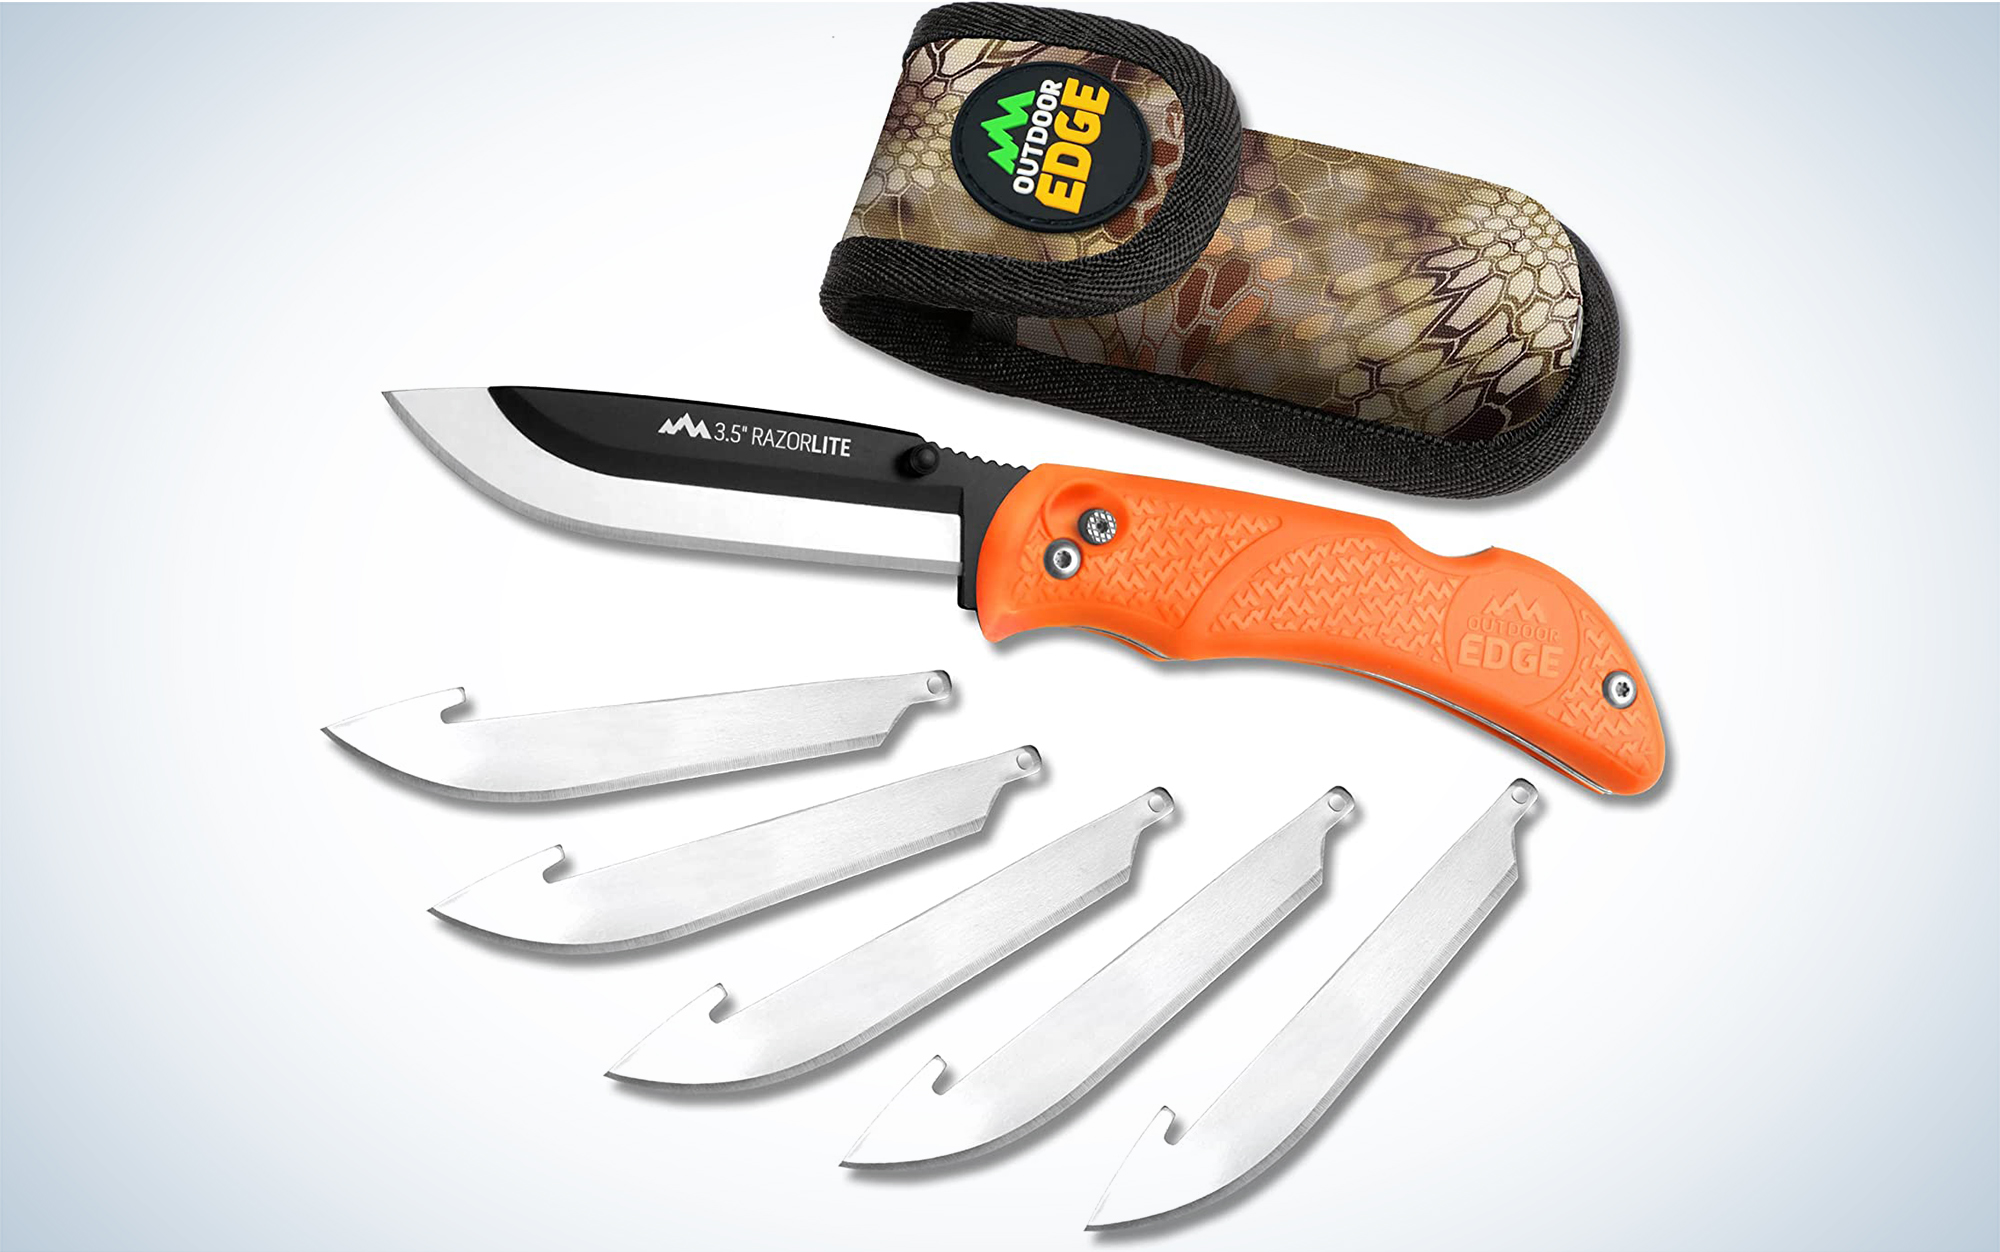 Best Prime Day 2020 knife deals: A full knife set for $40 with top